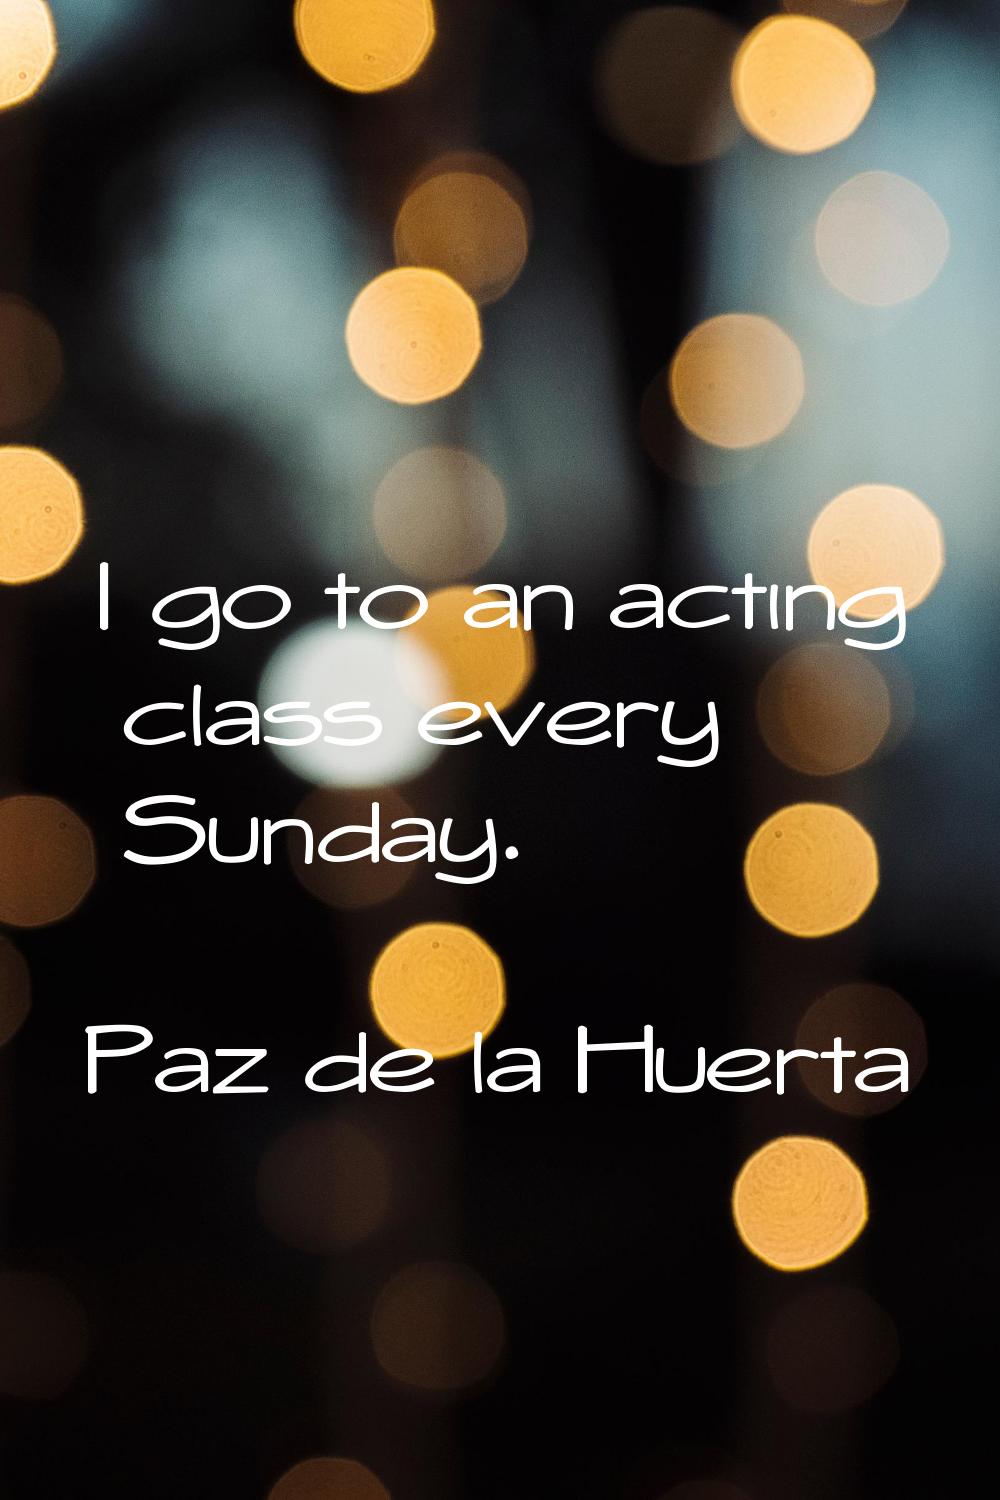 I go to an acting class every Sunday.